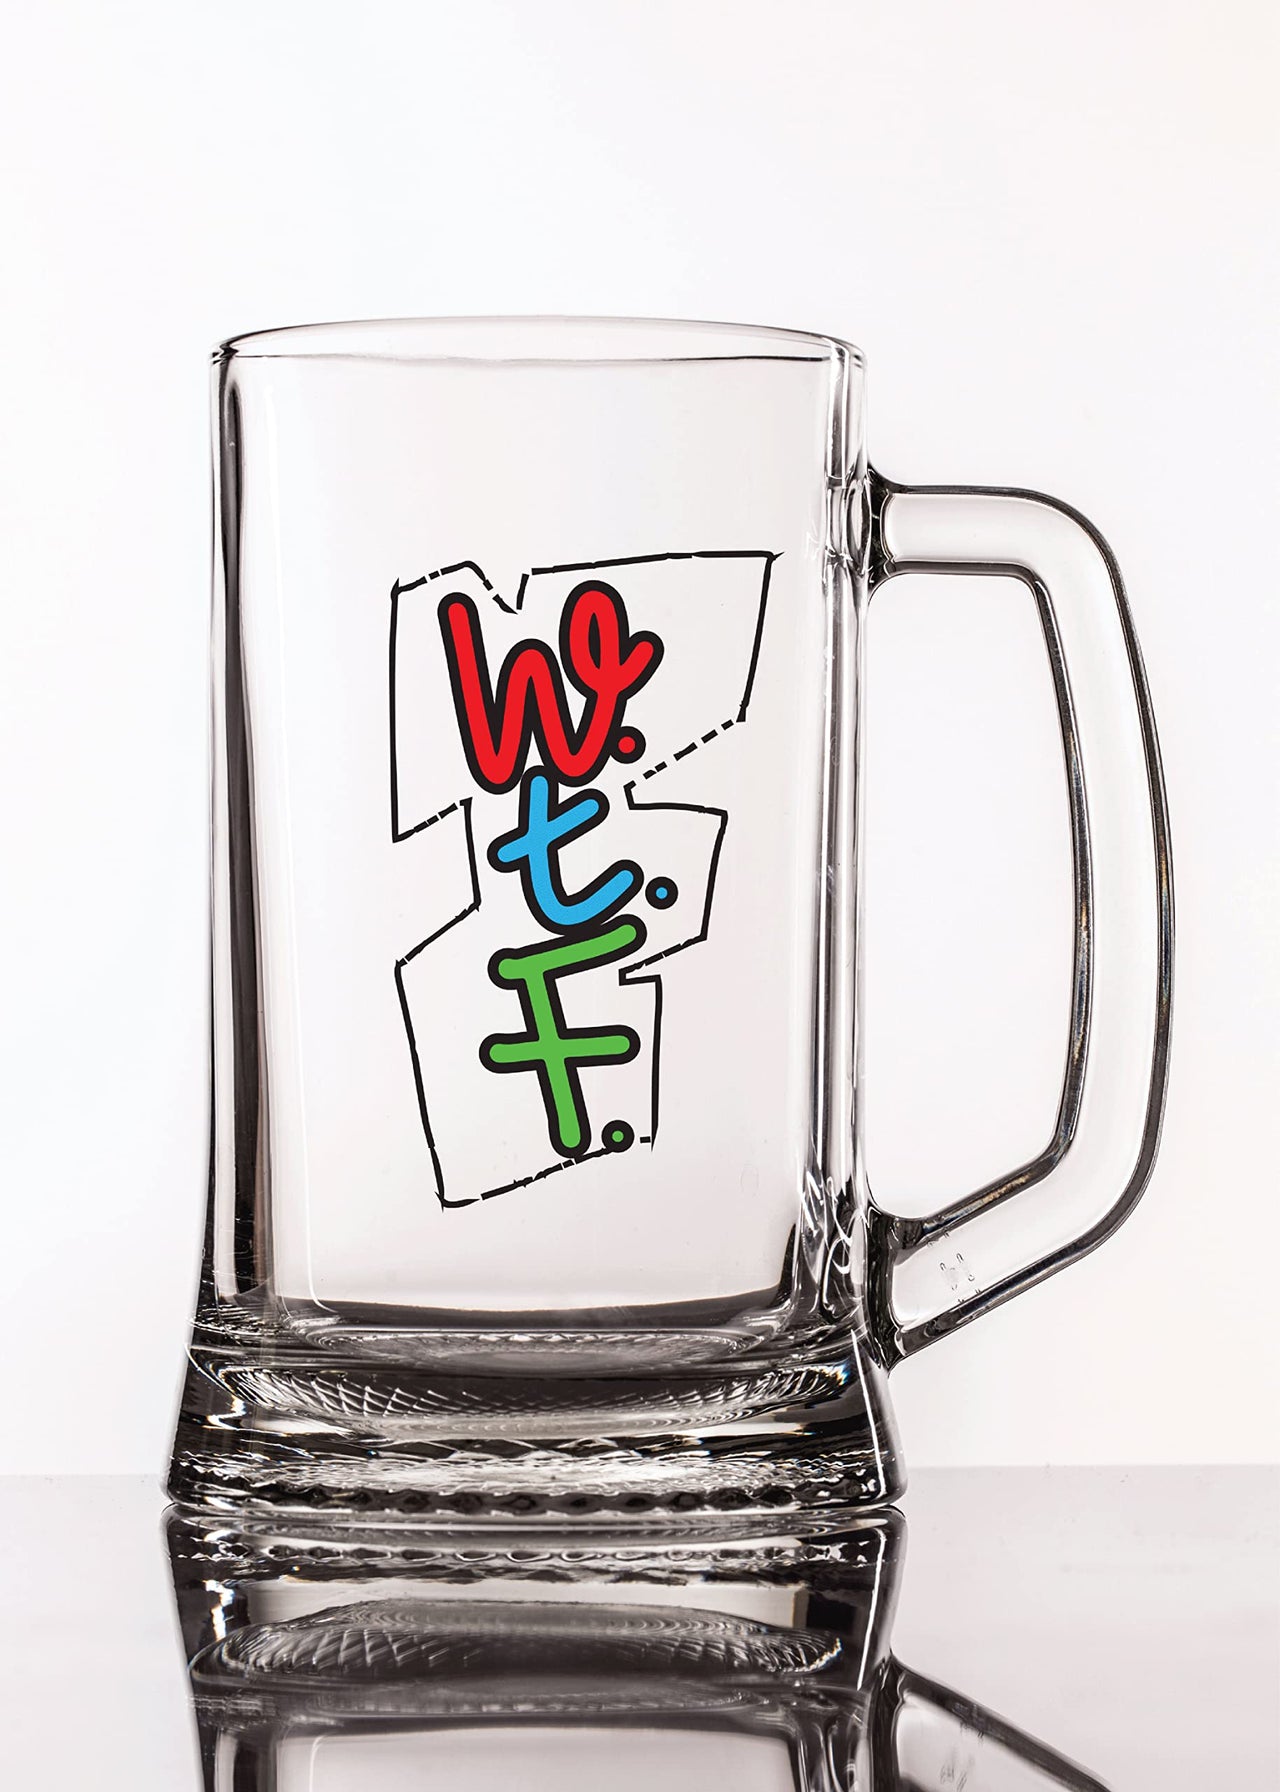 W.T.F. - Beer Mug - 1 Piece, Clear, 500 ml -Transparent Glass Beer Mug - Printed Beer Mug with Handle Gift for Men, Dad, Brother, Wife, Girlfriend, Husband